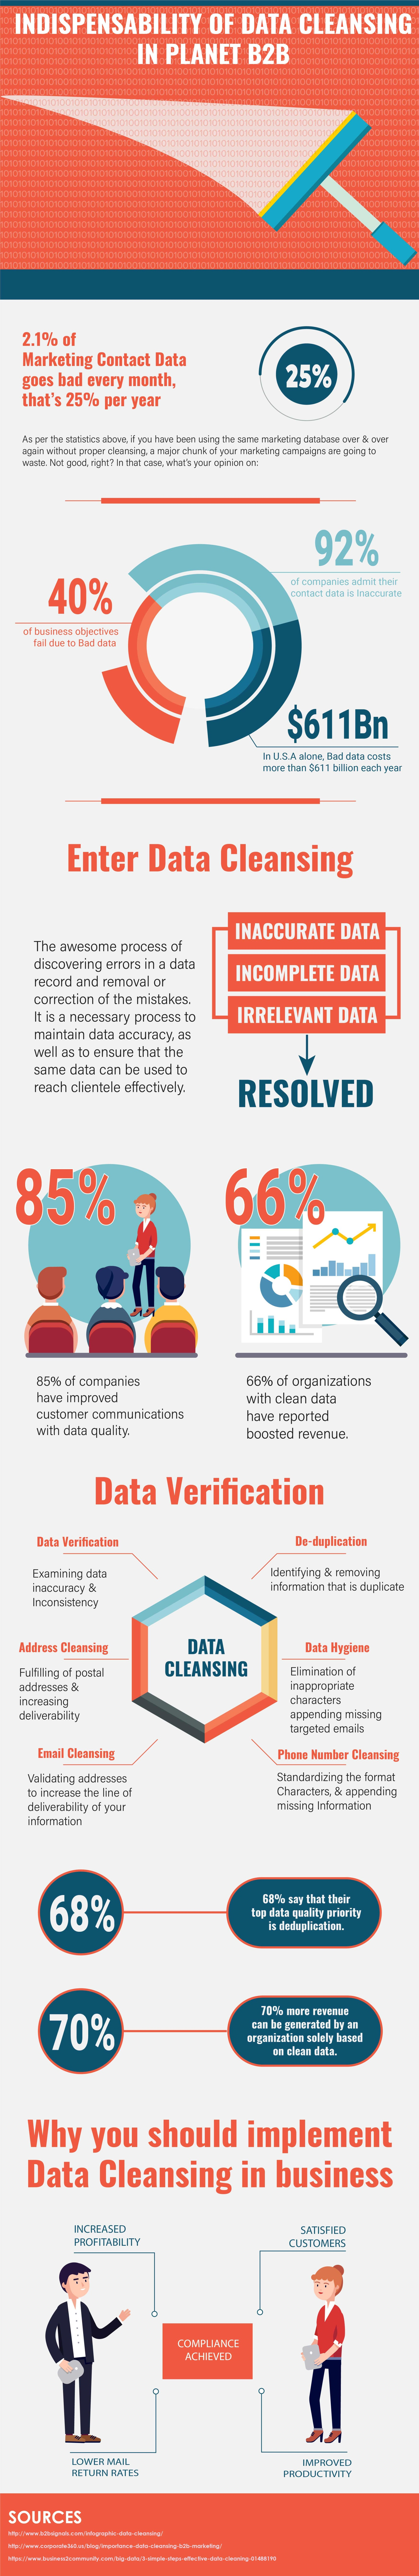 Indispensability of data cleansing in planet B2B - DataCaptive Infographic